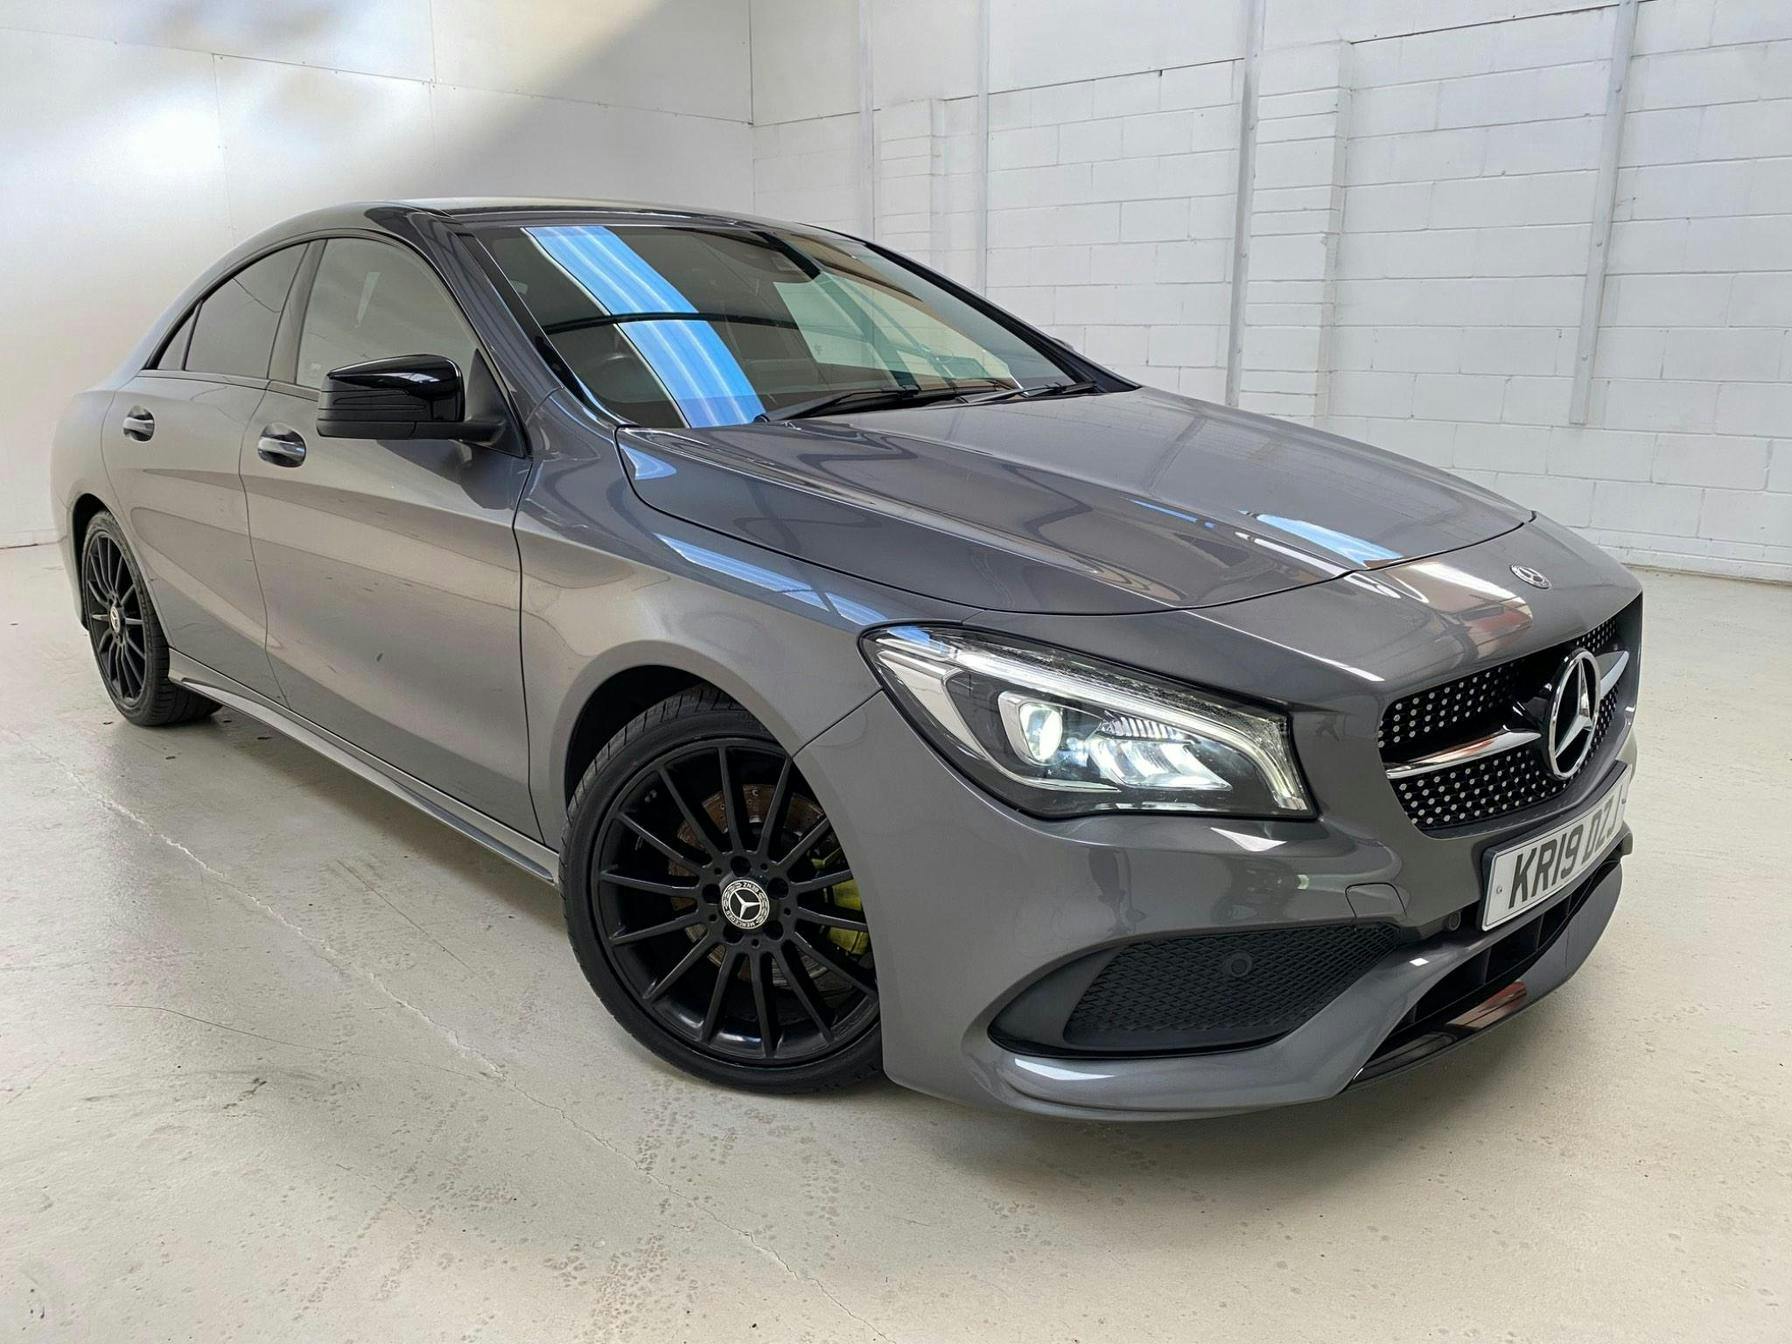 Mercedes Benz Cla Class 2.1 Cla220d Amg Line Night Edition Coupe 7g-dct 4matic Euro 6 (s/s) 4dr Saloon 2019